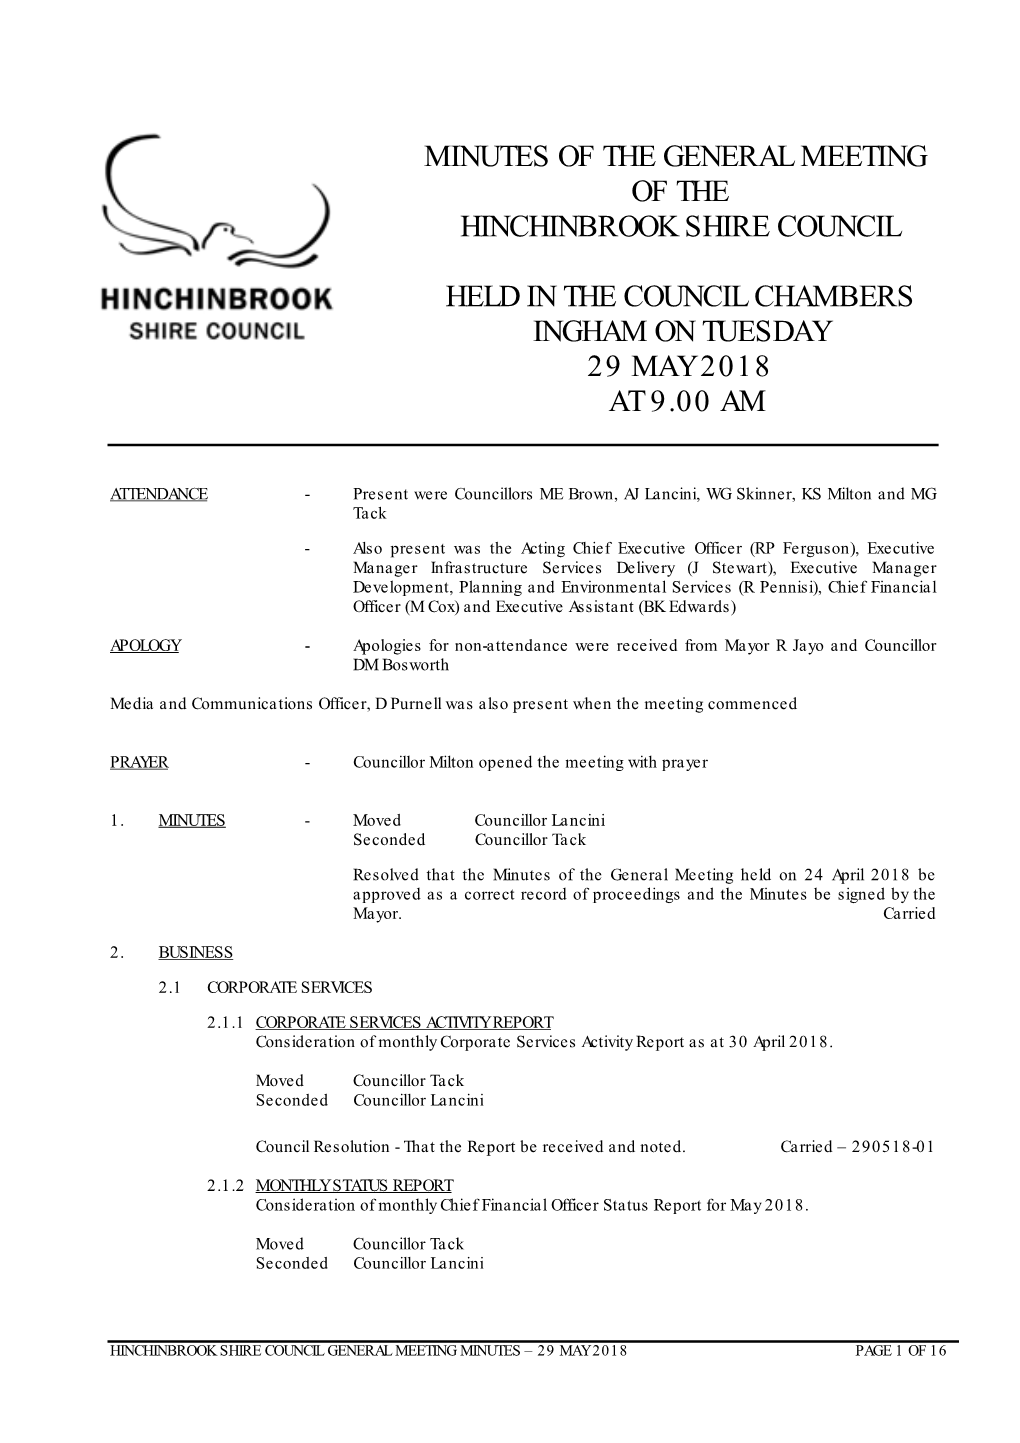 Minutes of the General Meeting of the Hinchinbrook Shire Council